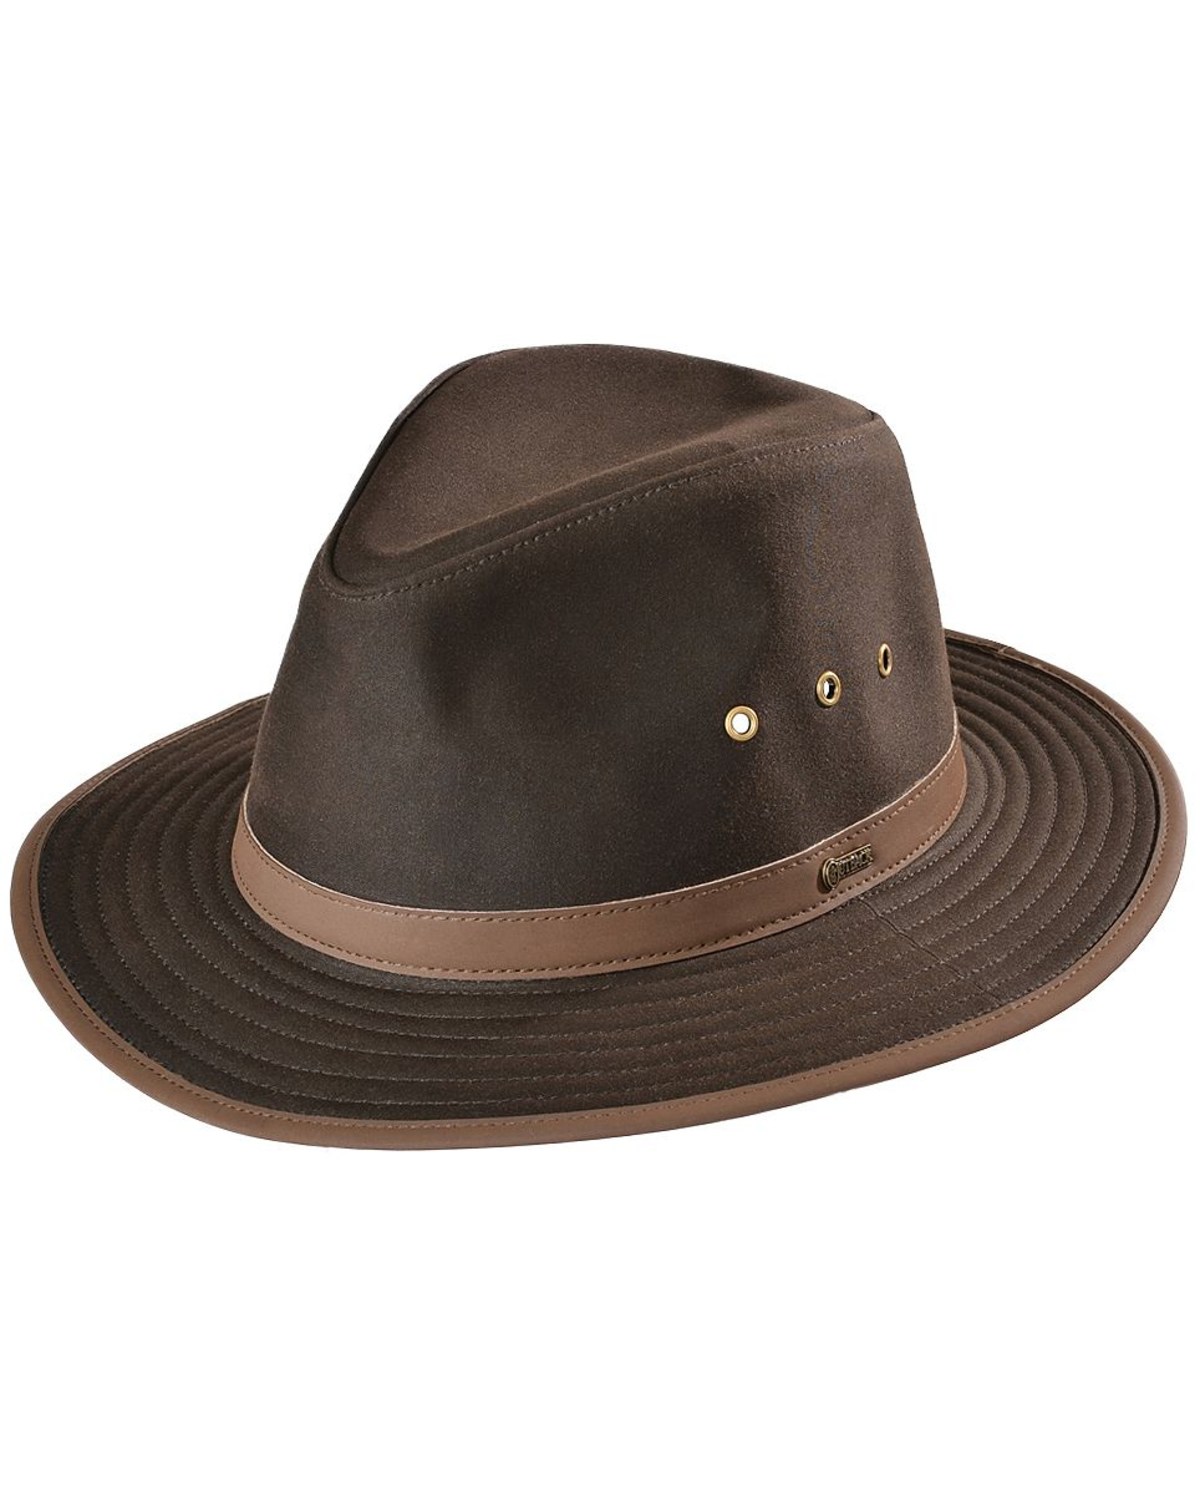 Outback Trading Co. Men's Madison River UPF50 Sun Protection Oilskin Hat